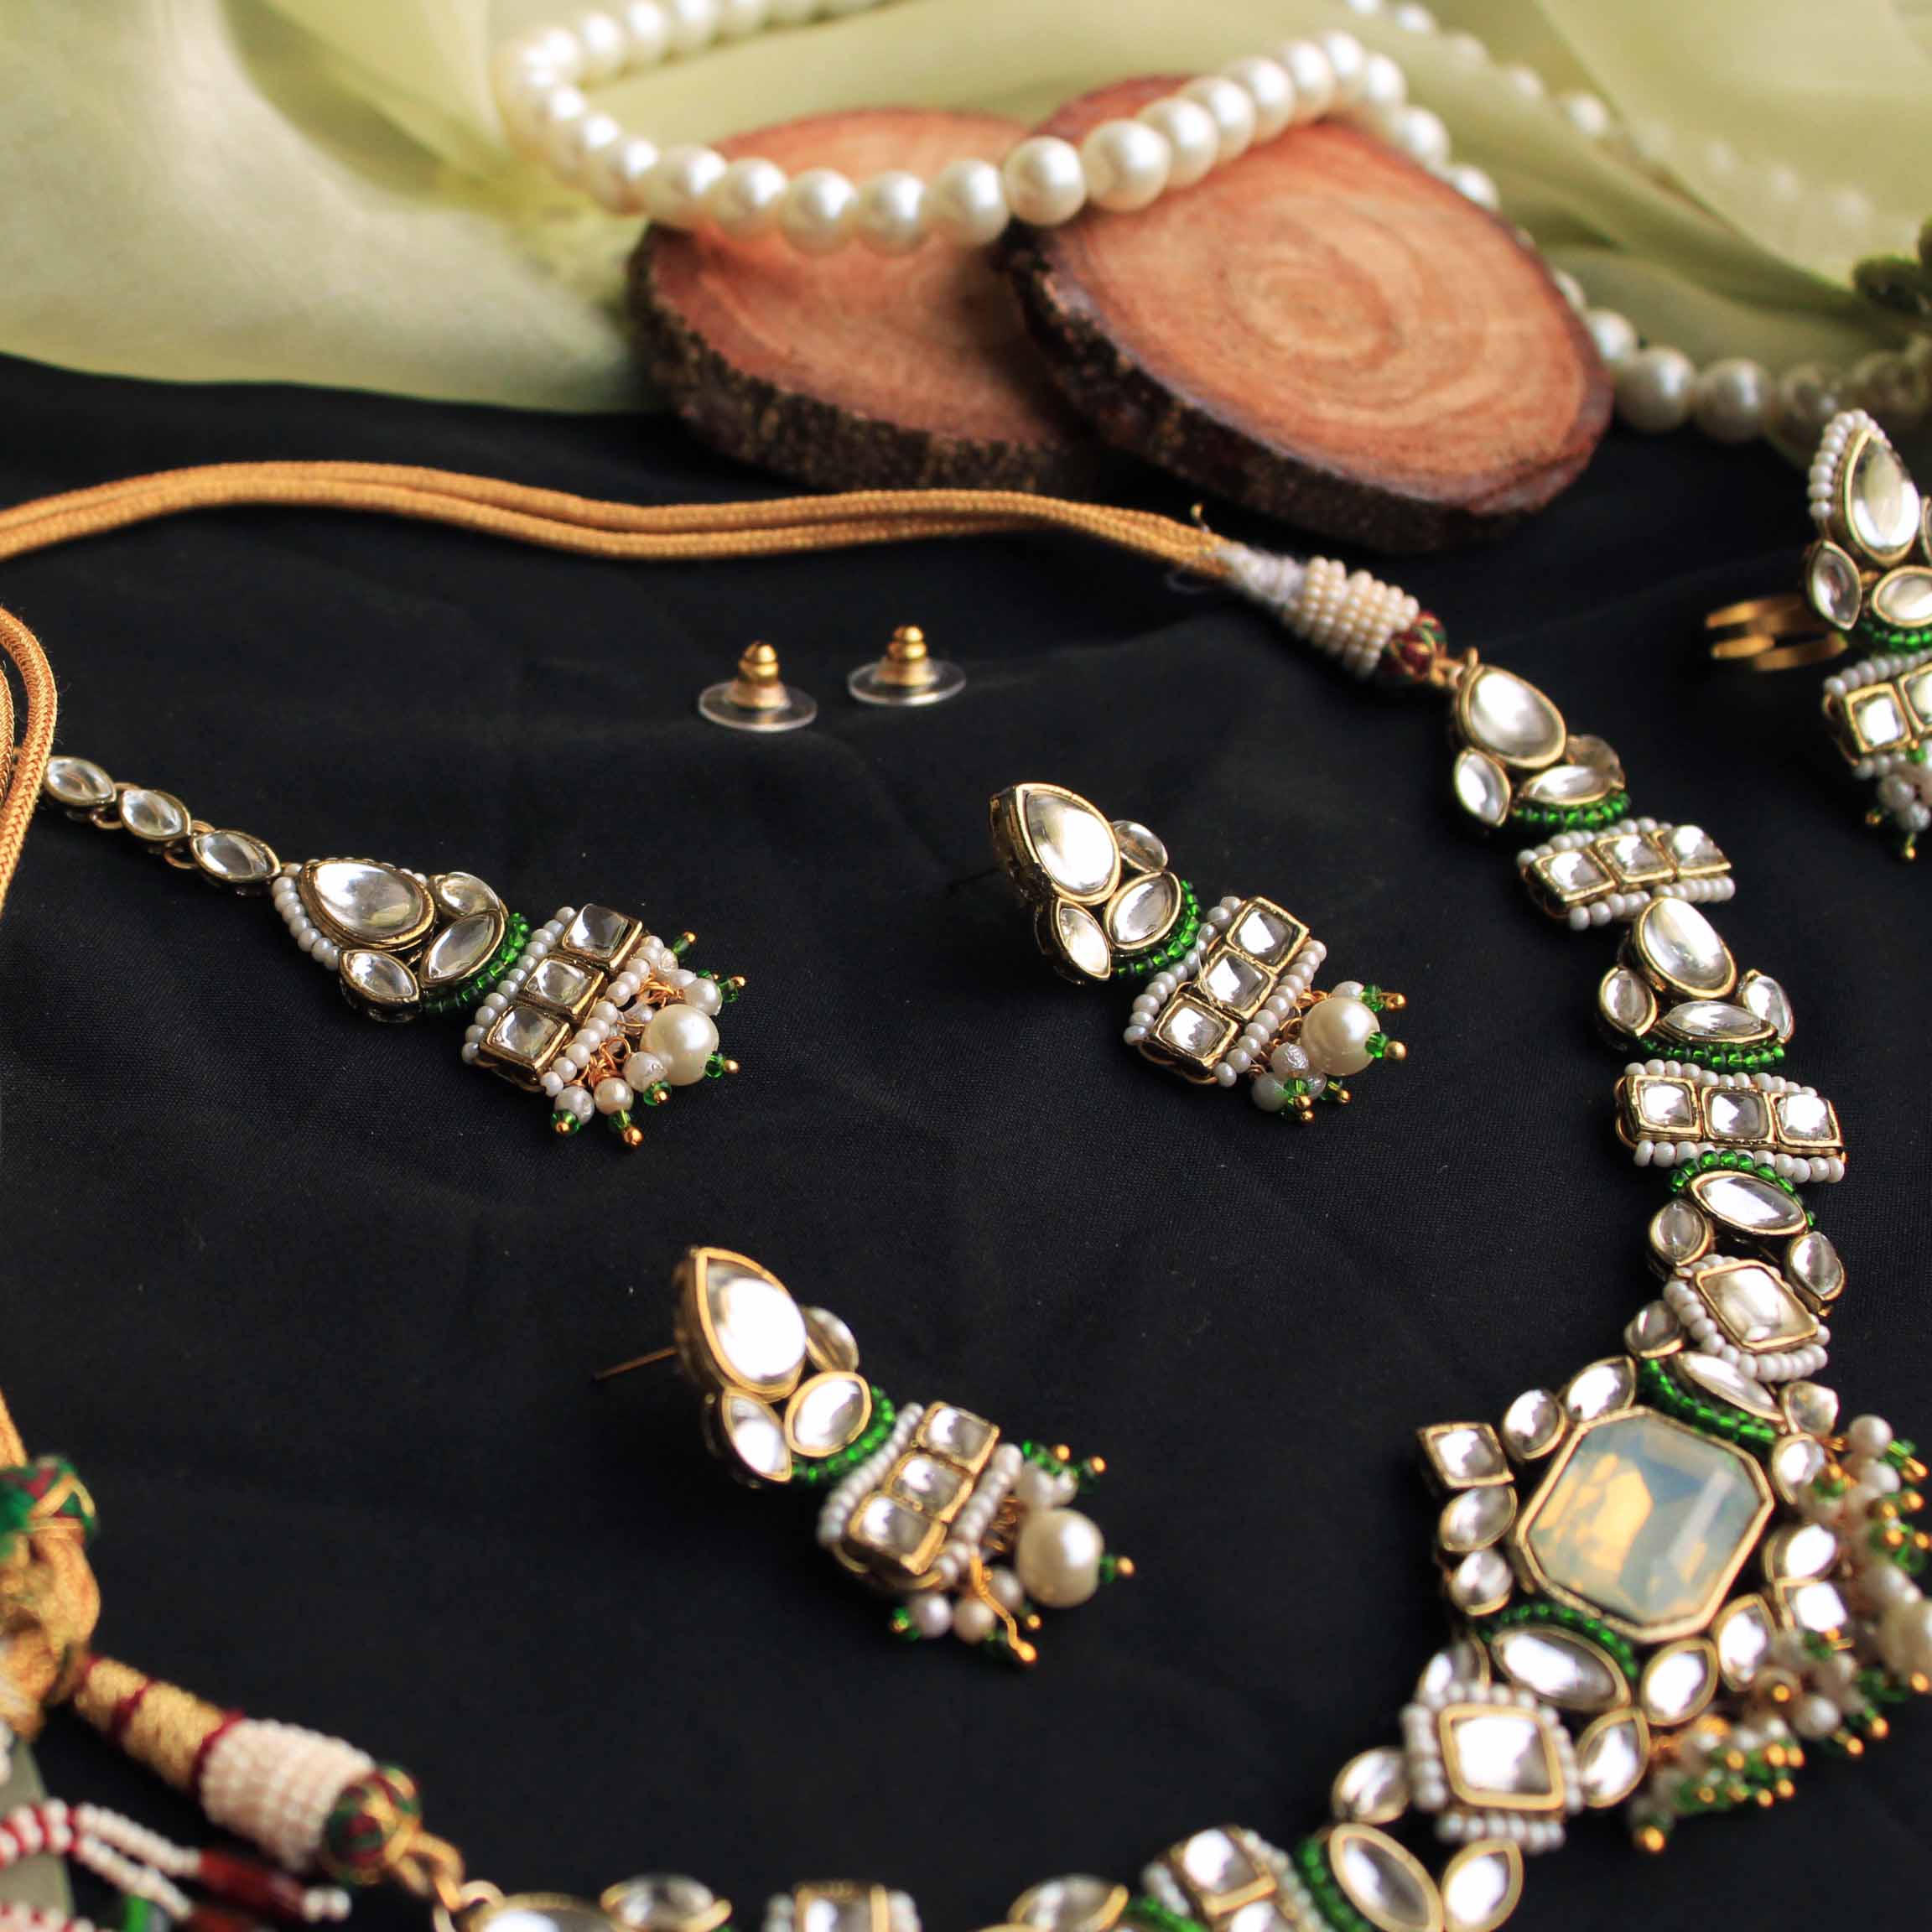 Beabhika Handmade Kundan Necklace With Matching Earrings Rings Maang Tikka Combo Set Green Artificial Jewelry Kundan Earrings Golden Earrings With Matching Ring Pearls Kundan Wedding Jewelry Trendy Earrings Daily Wear Party Wear Traditional Ethnic Dress Jewelry Earrings Bridal Jewelry Set Online Cash On Delivery Value Saver Combo Jewelry Set Cheap Price